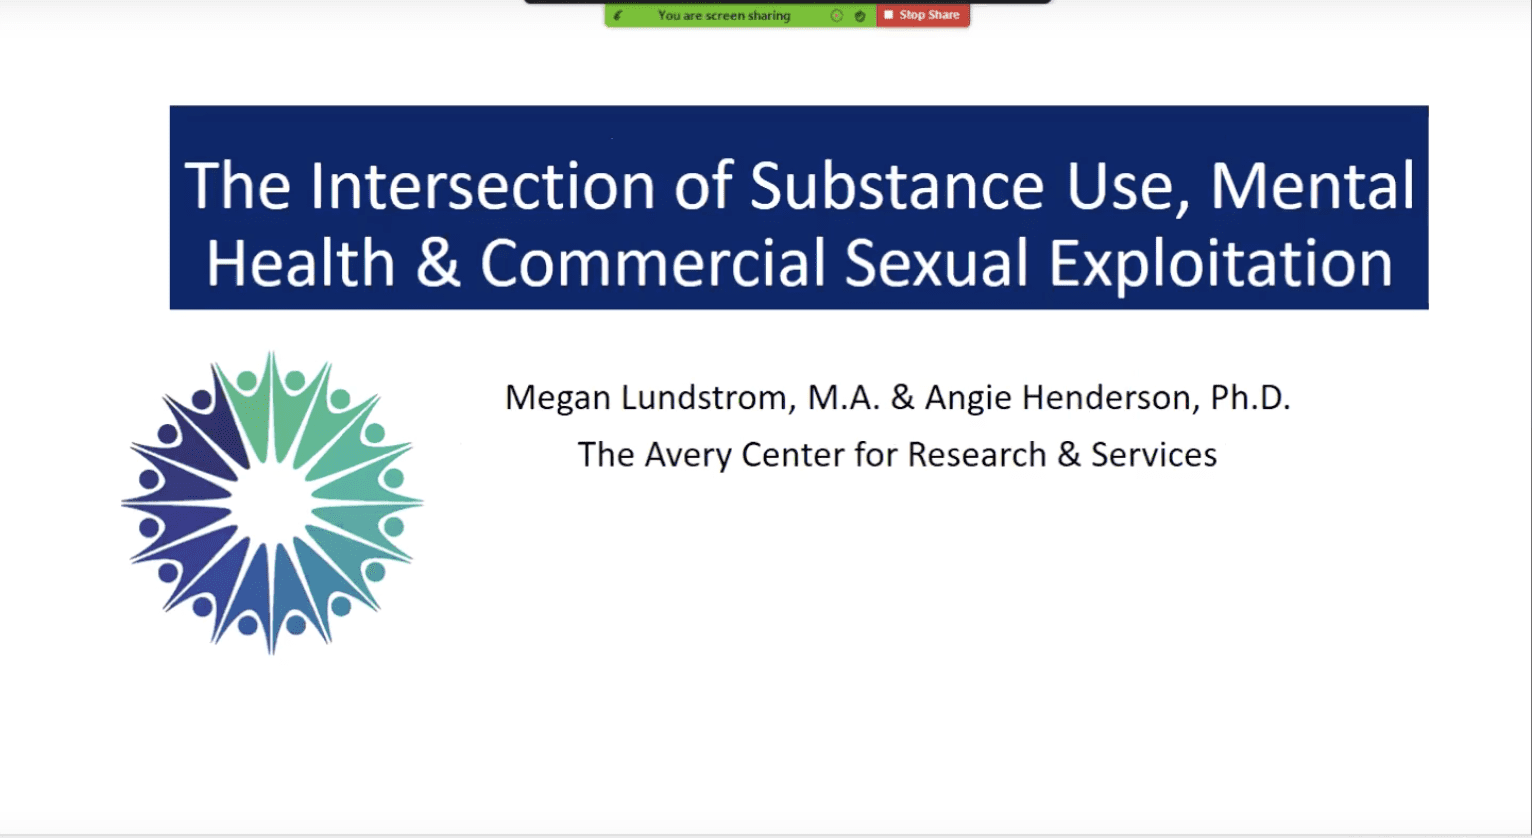 The Intersection of Substance Use, Mental Health & Commercial Sexual Exploitation